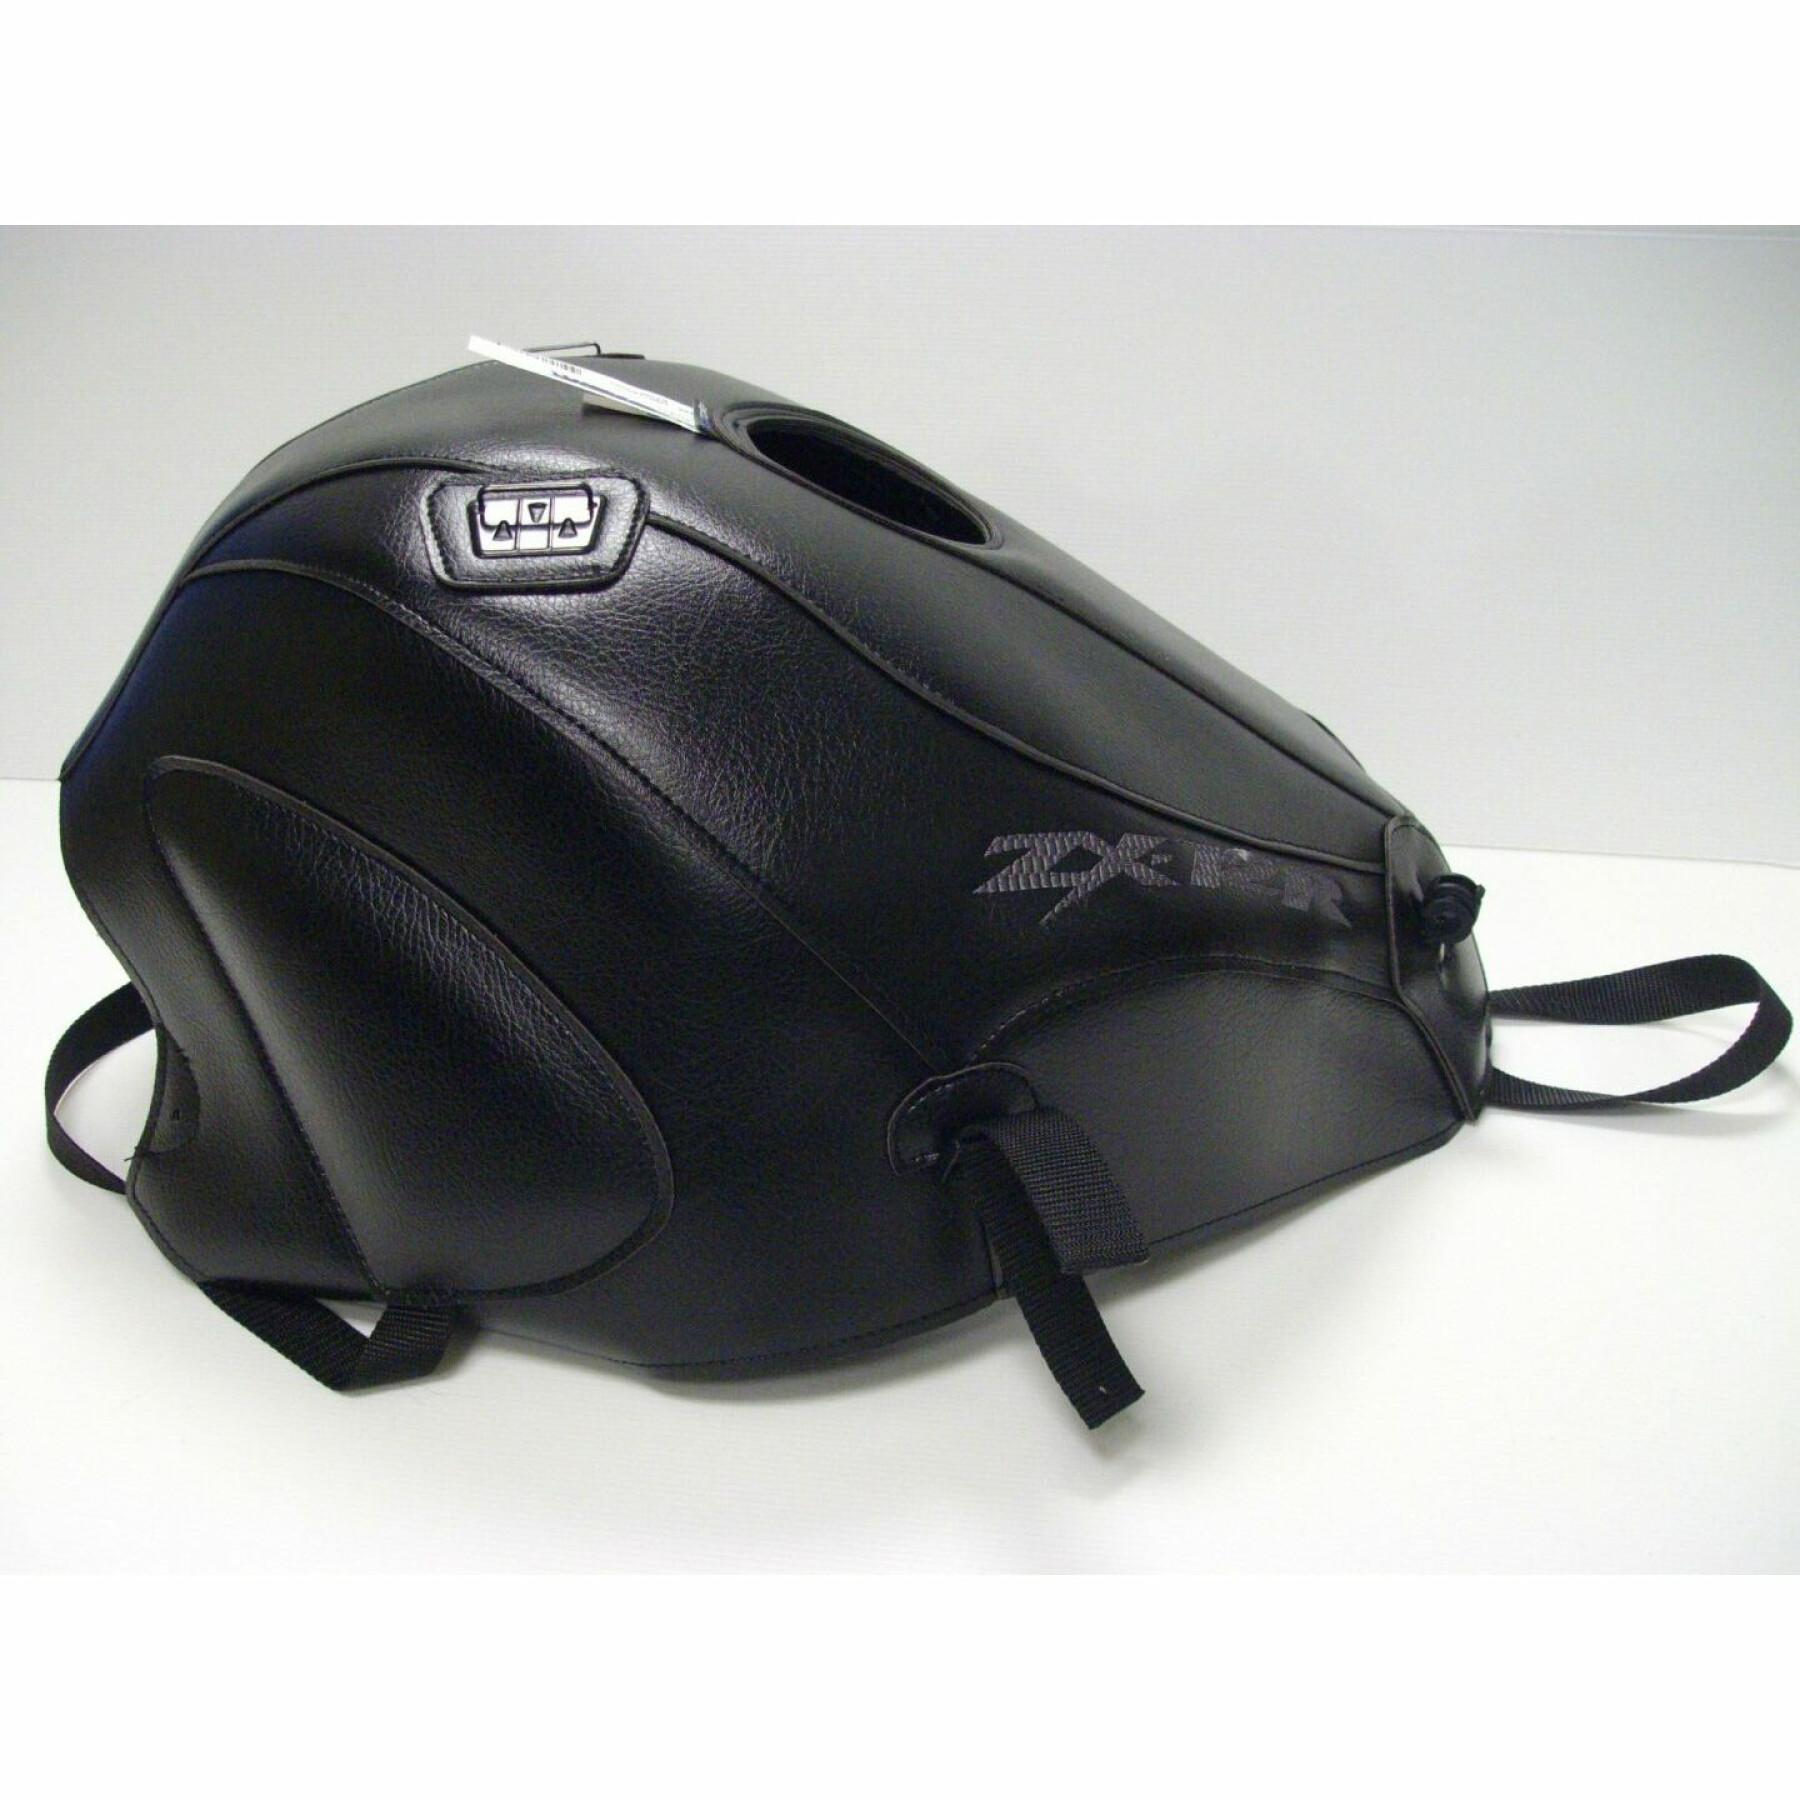 Motorcycle tank cover Bagster zx 12 r